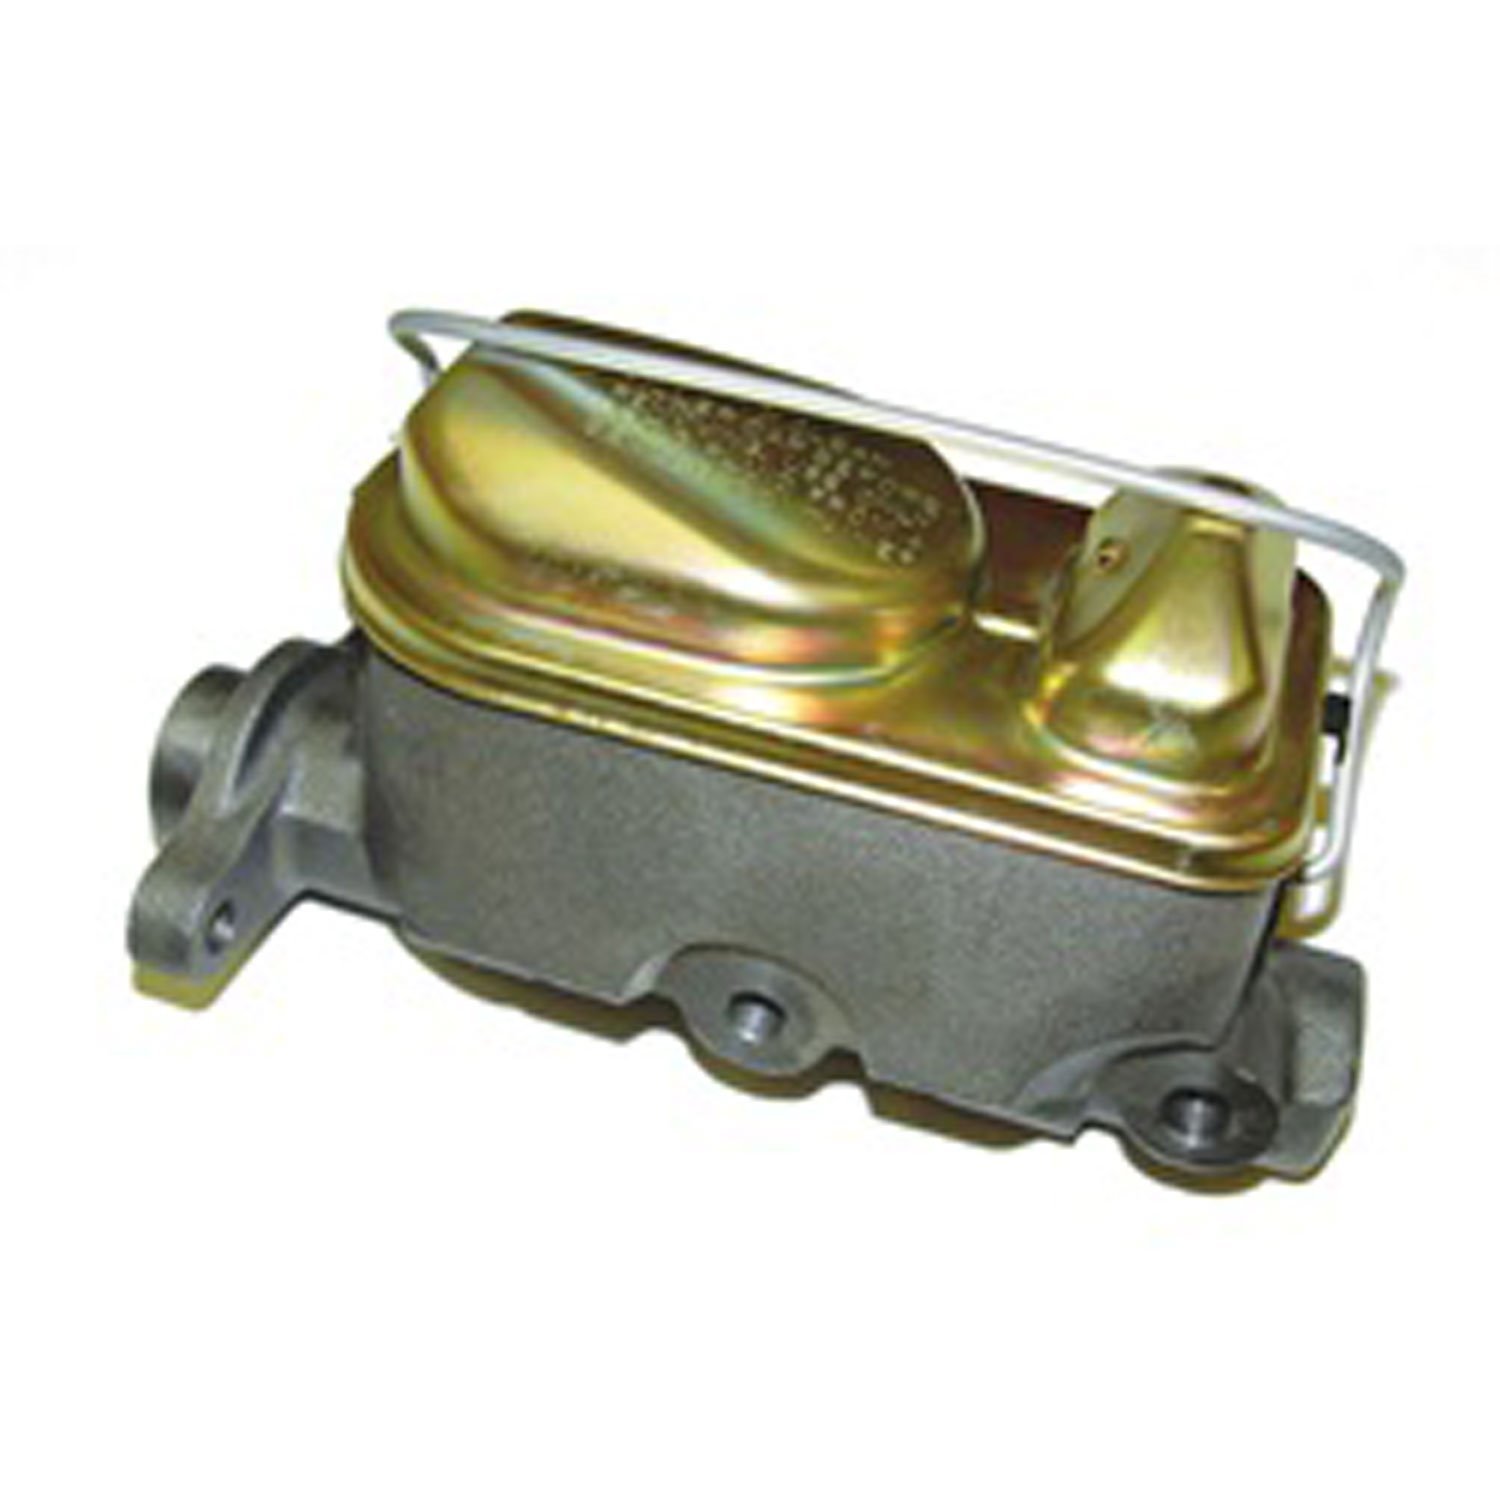 This replacement brake master cylinder from Omix-ADA fits